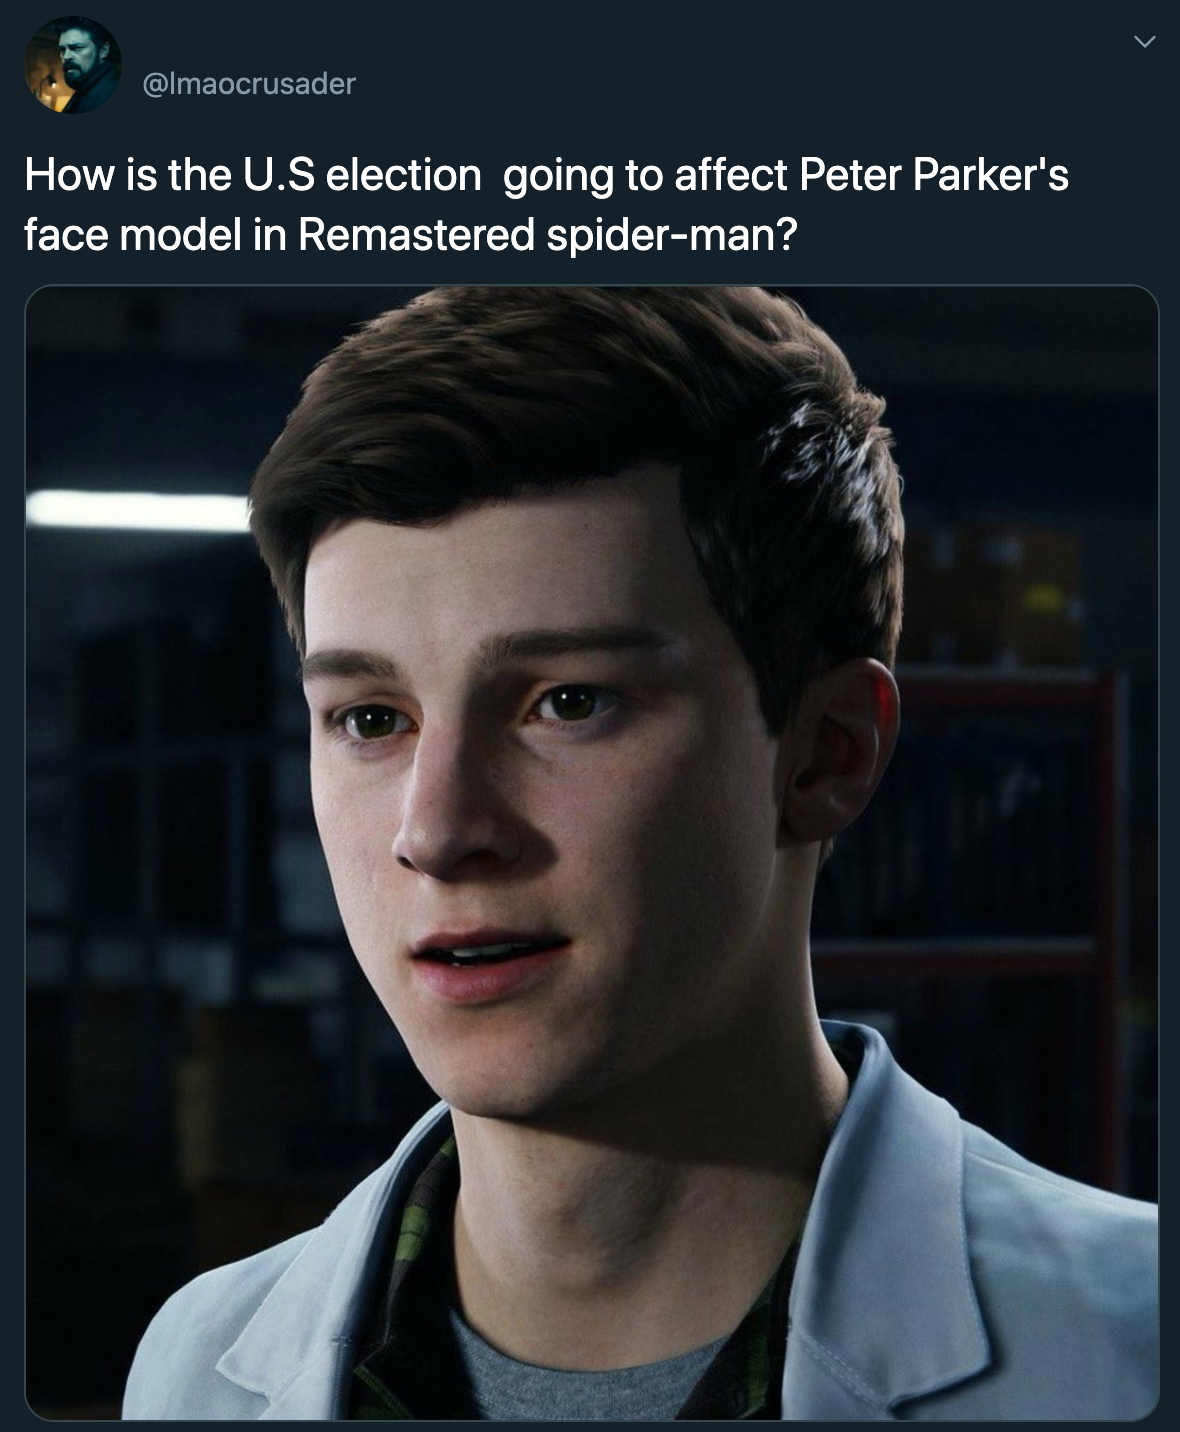 How is the U.S election going to affect Peter Parker's face model in Remastered spiderman?